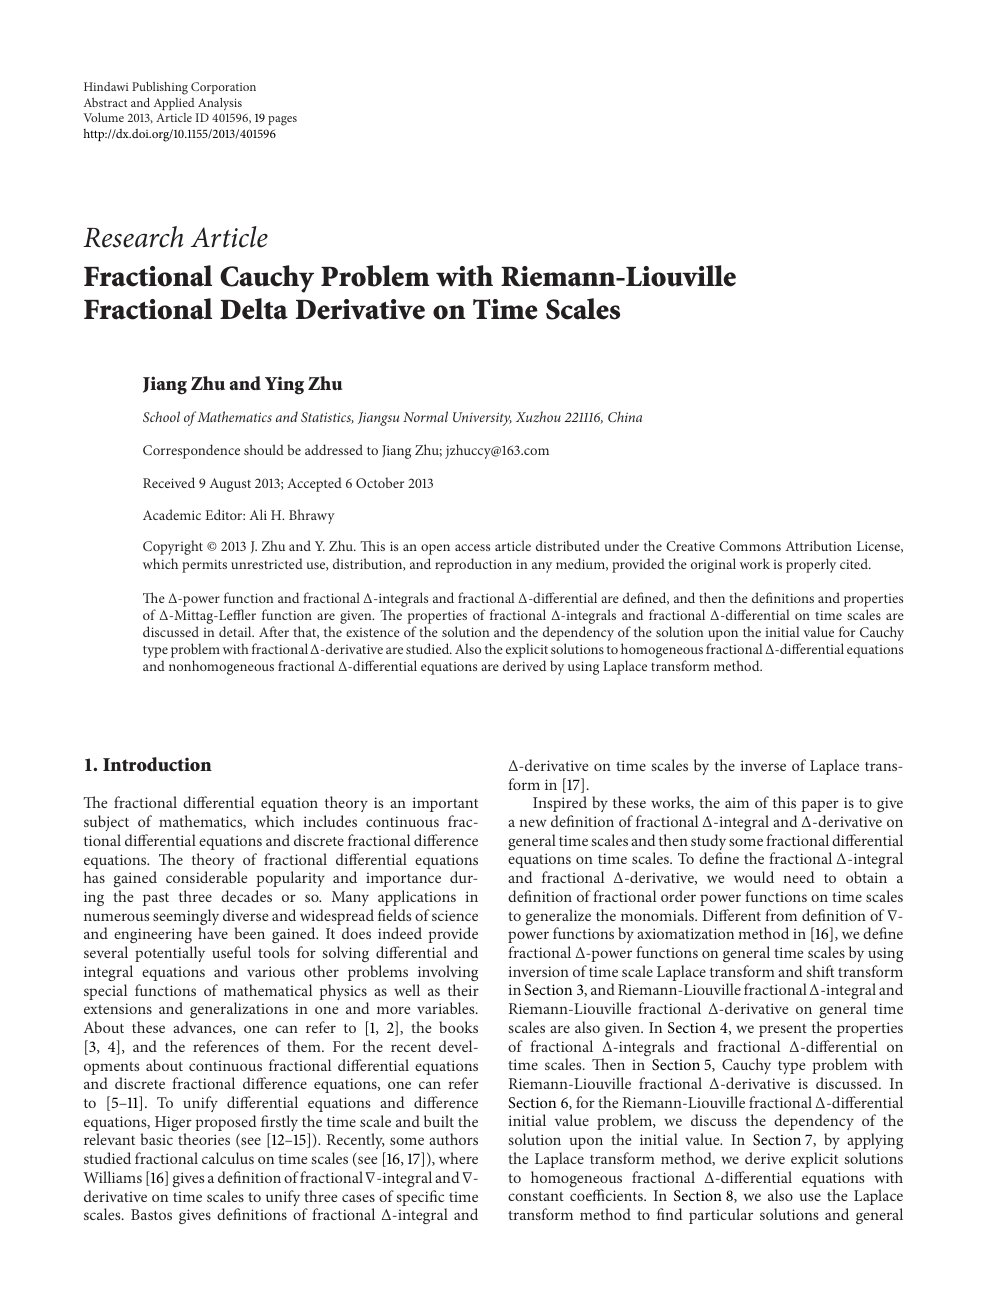 Fractional Cauchy Problem With Riemann Liouville Fractional Delta Derivative On Time Scales Topic Of Research Paper In Mathematics Download Scholarly Article Pdf And Read For Free On Cyberleninka Open Science Hub